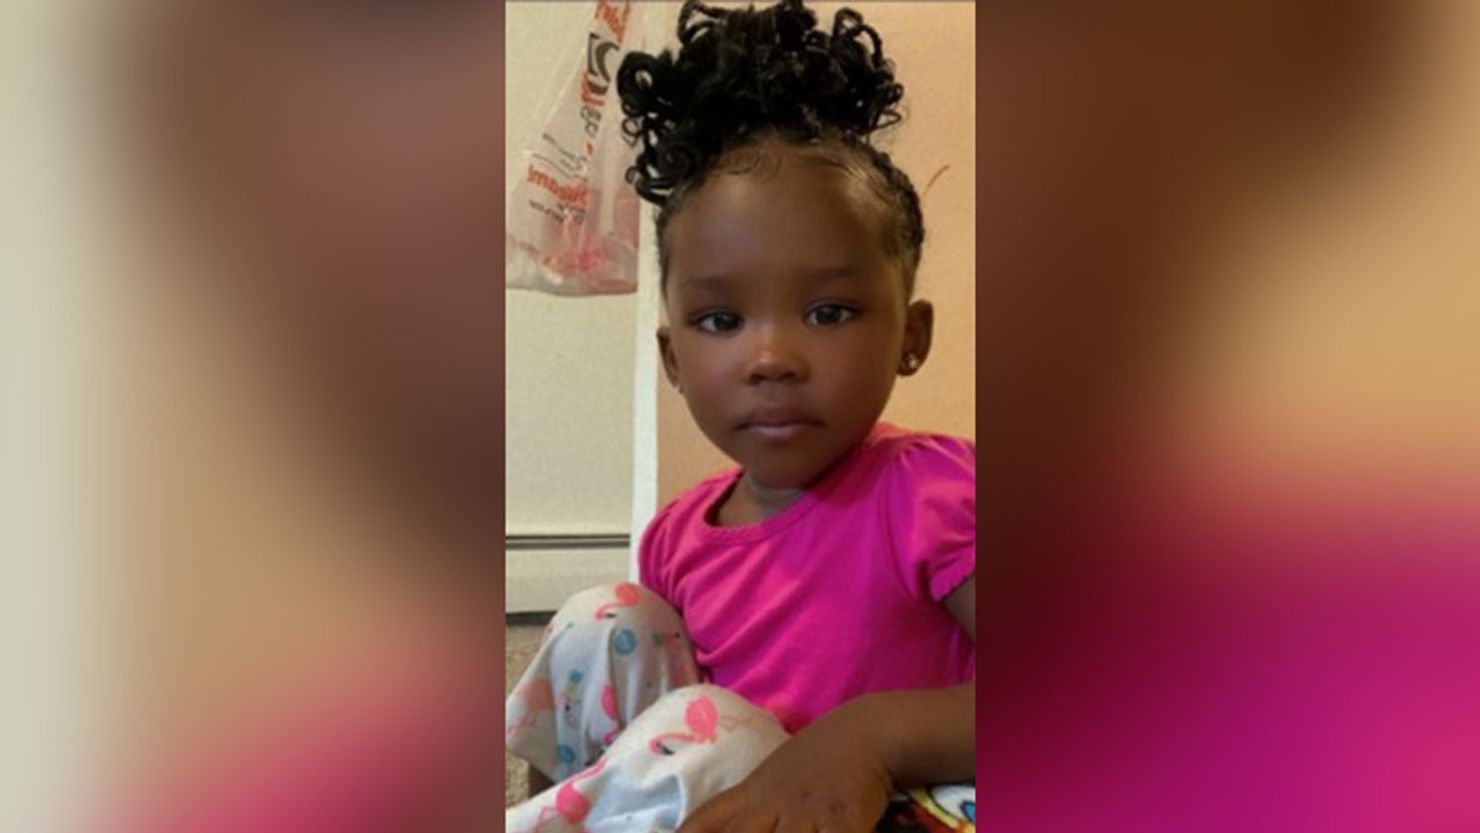 The 2-year-old last wore braids and a rainbow T-shirt. Now, her body ...